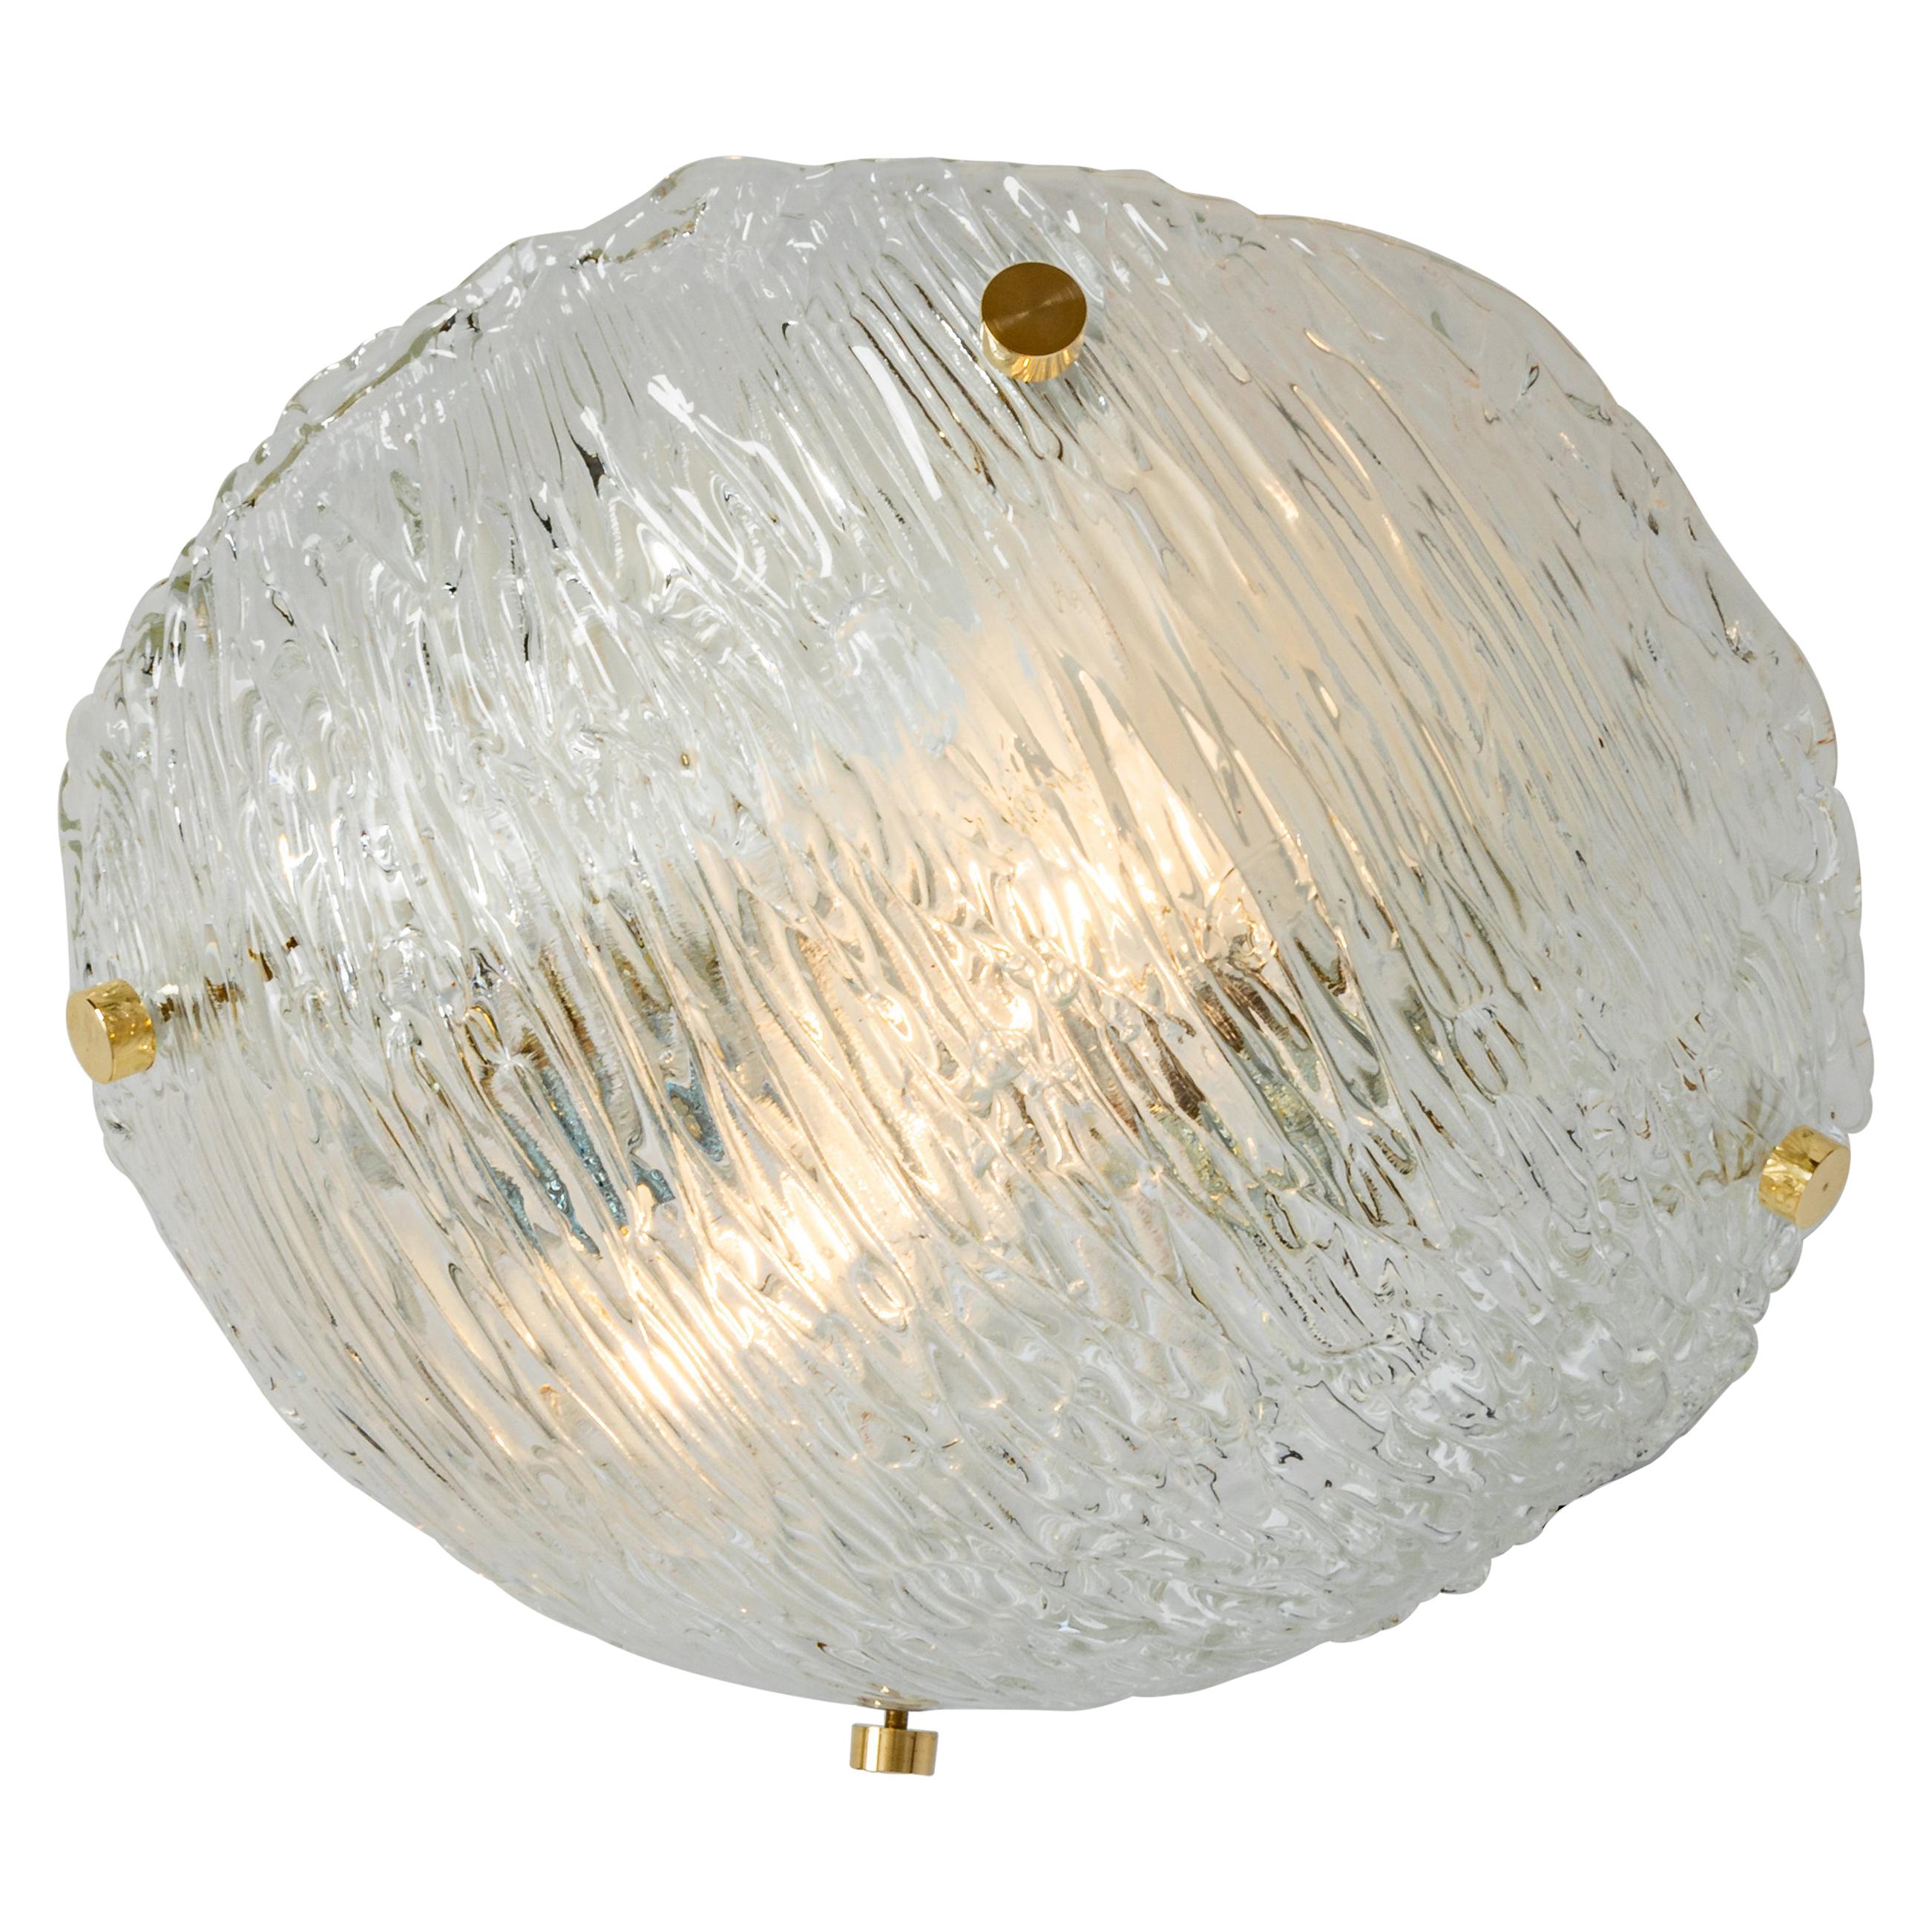 1 of 2 Venini Ceiling Lights Attributed to Carlo Scarpa for Venini, 1950s For Sale